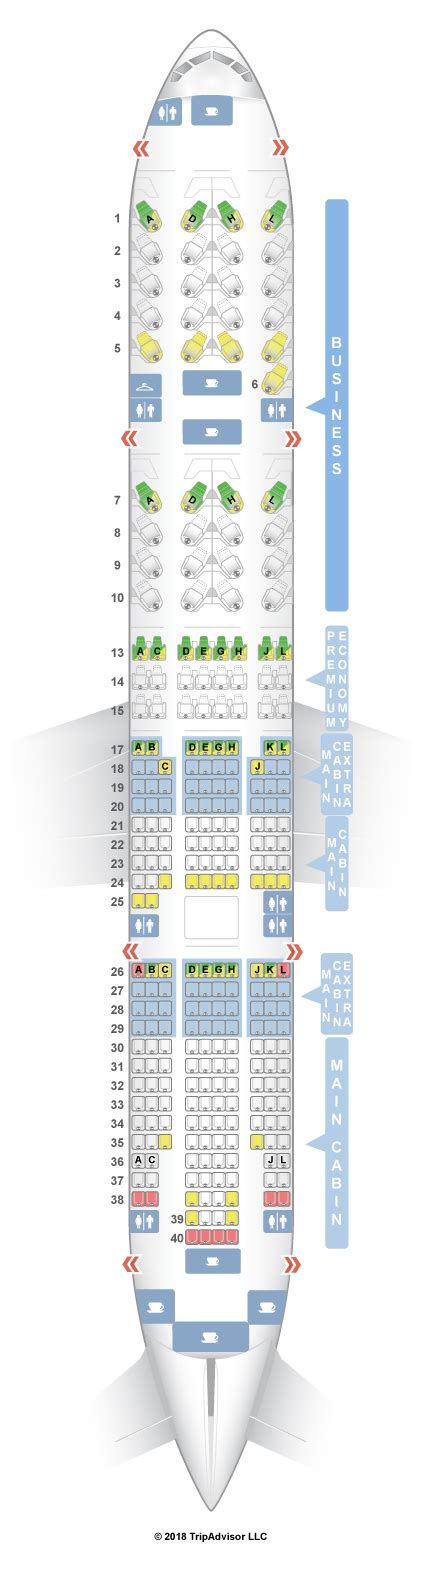 Conclusion: BA's 777-200 World Traveller cabin is outdat